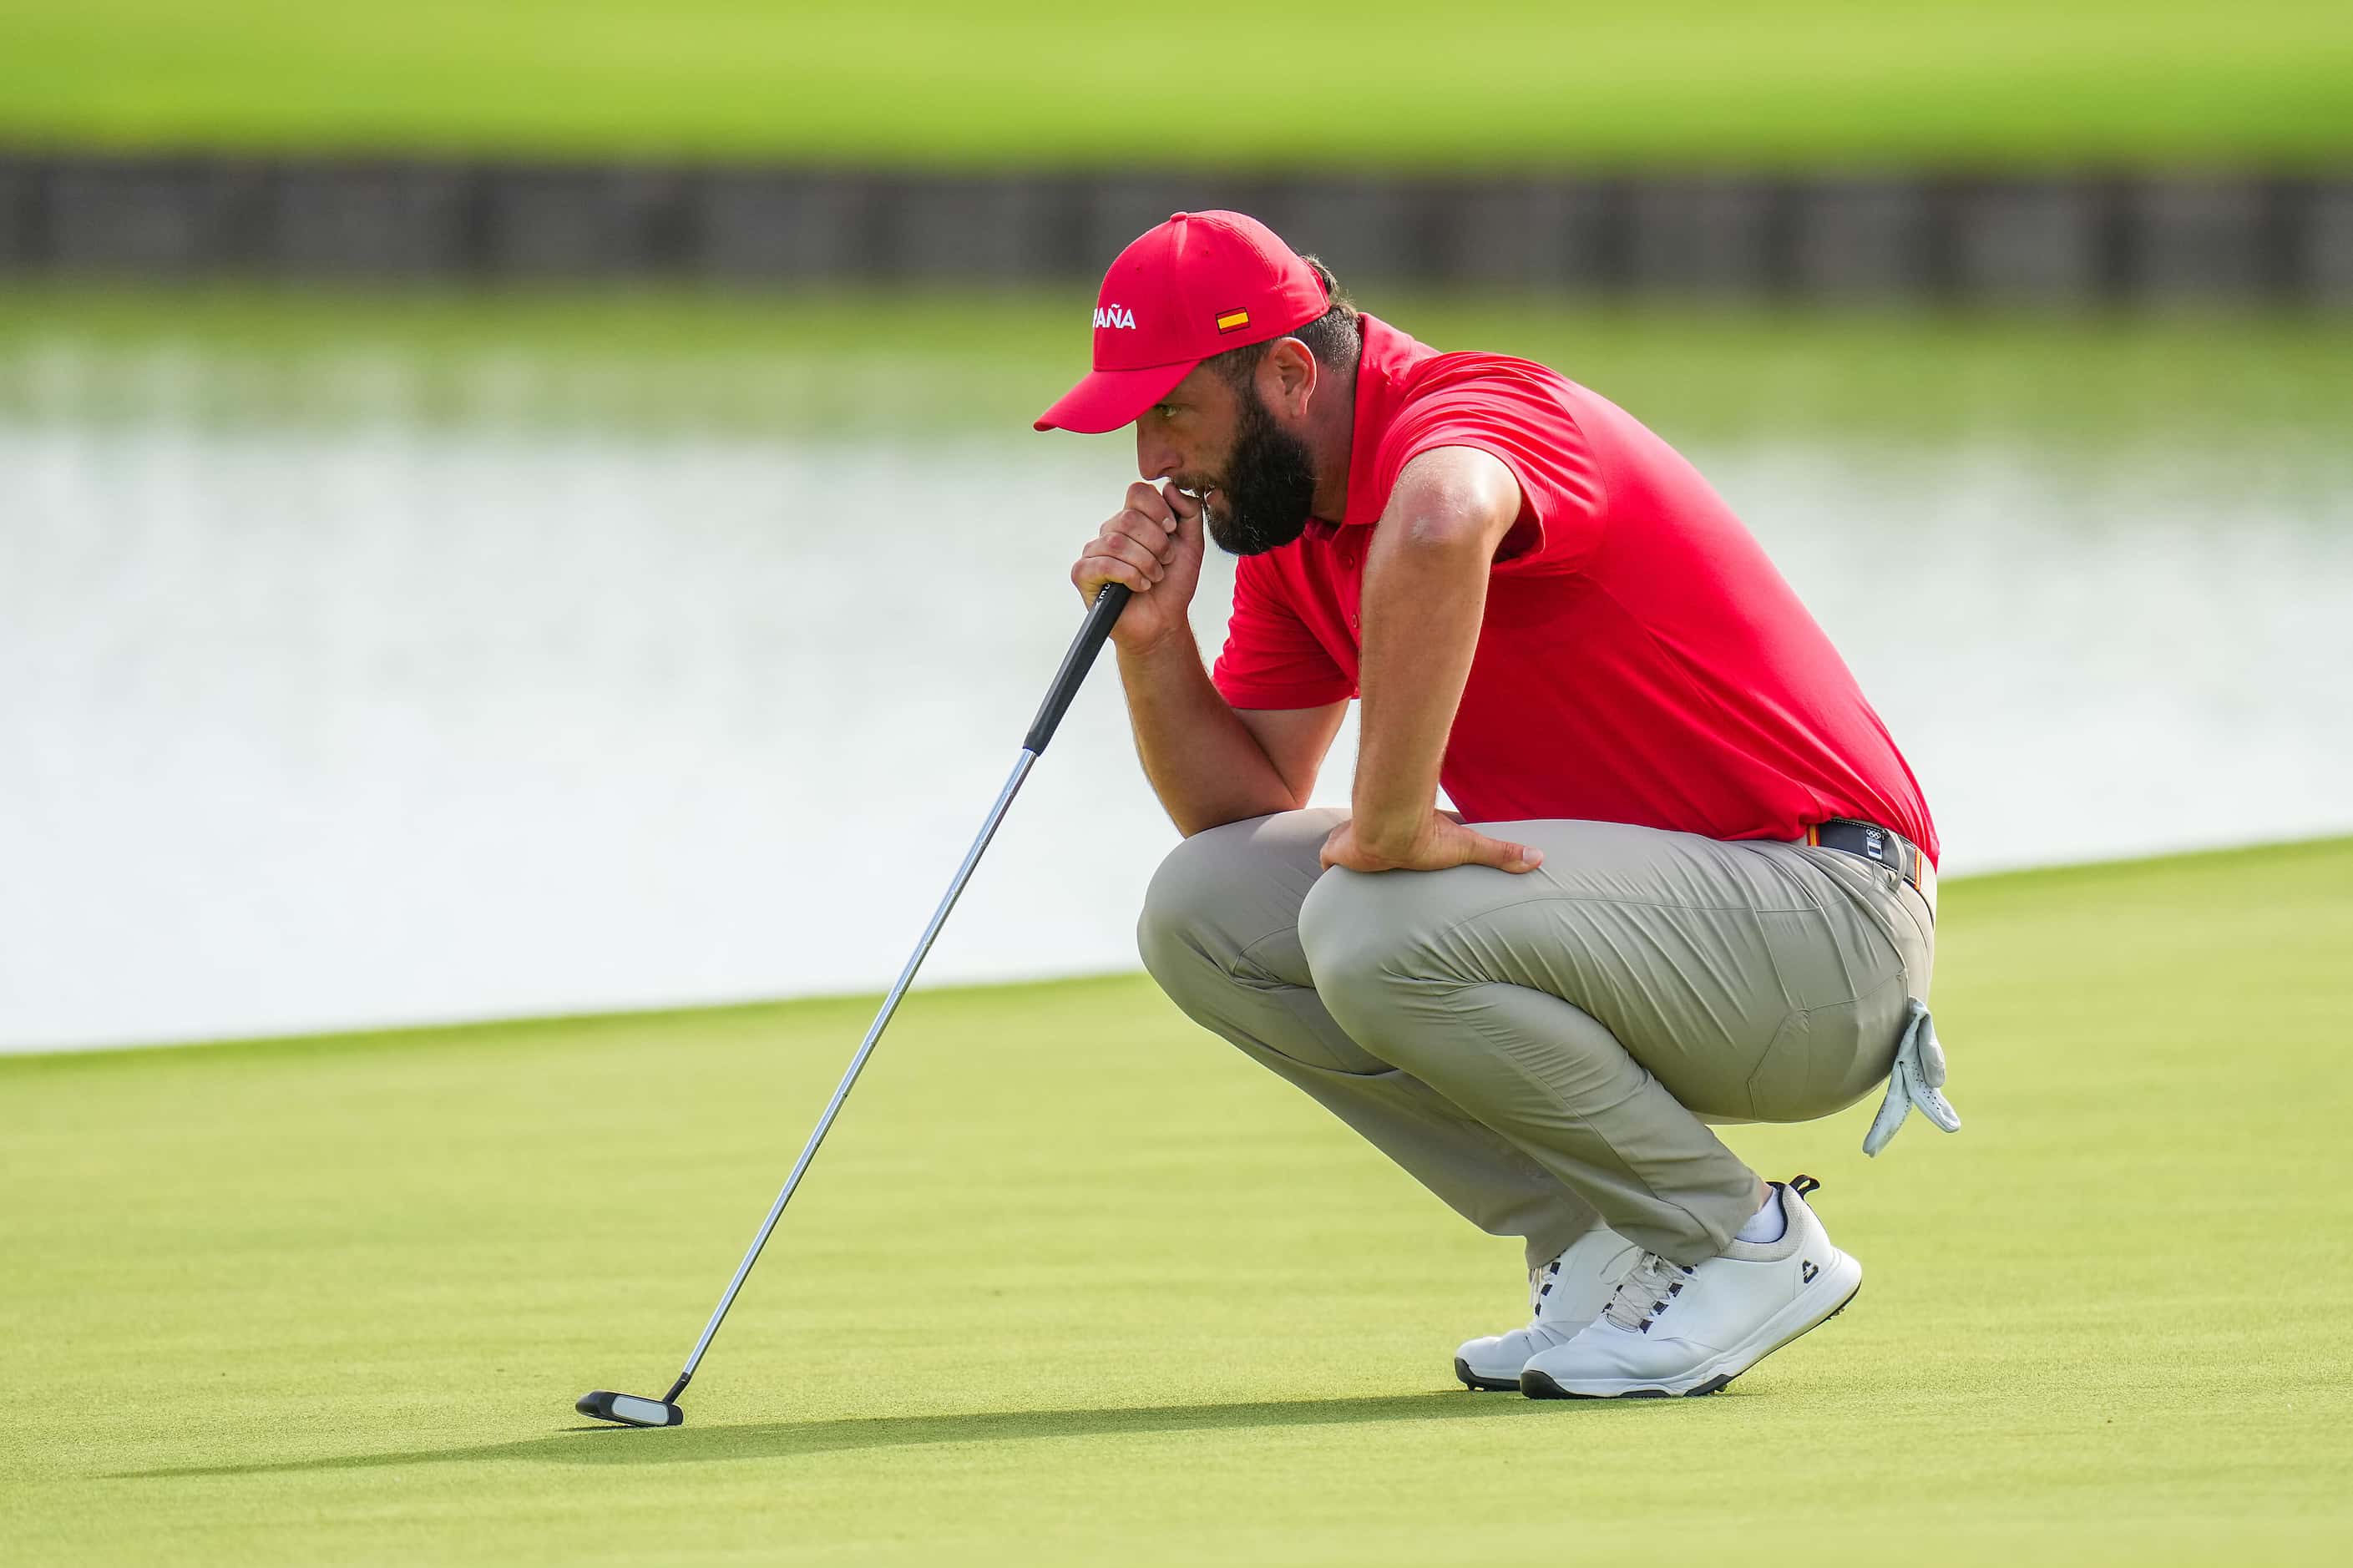 Jon Rahm of Spain lines up a put during the final round of men's golf at the 2024 Summer...